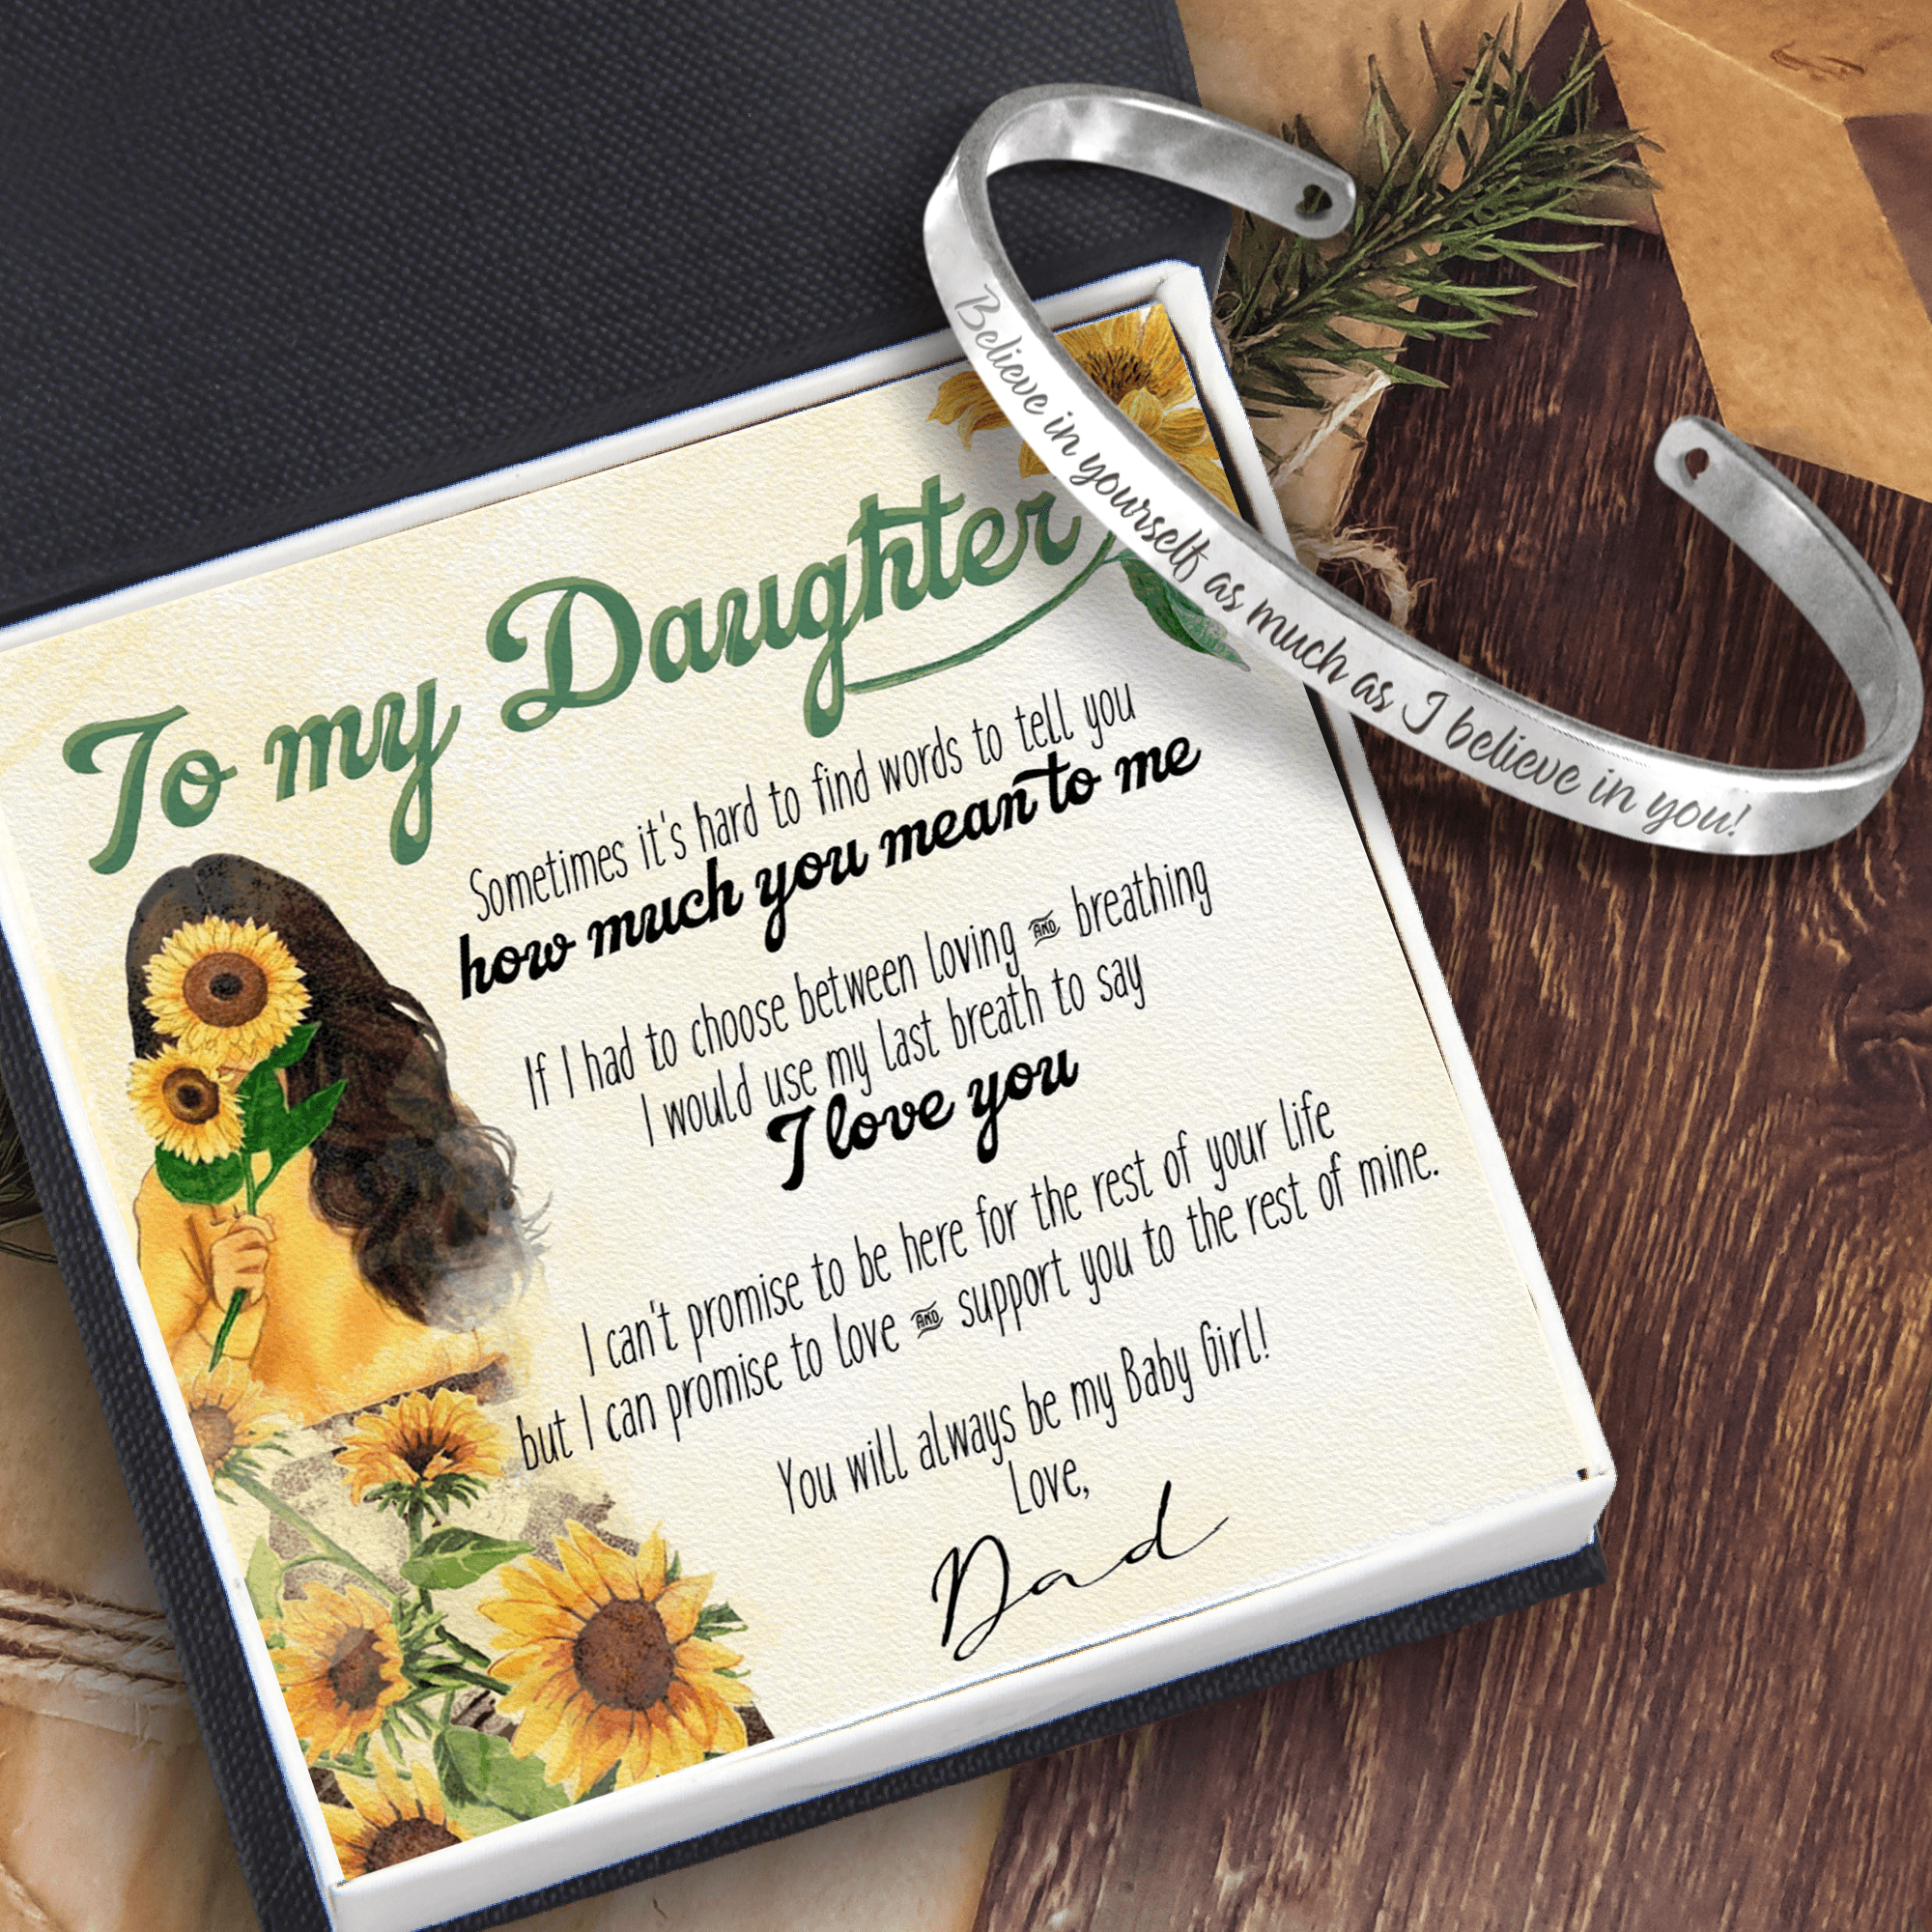 Daughter's Bracelet - Family - From Dad - To My Daughter - You Will Always Be My Baby Girl - Augbzf17021 - Gifts Holder